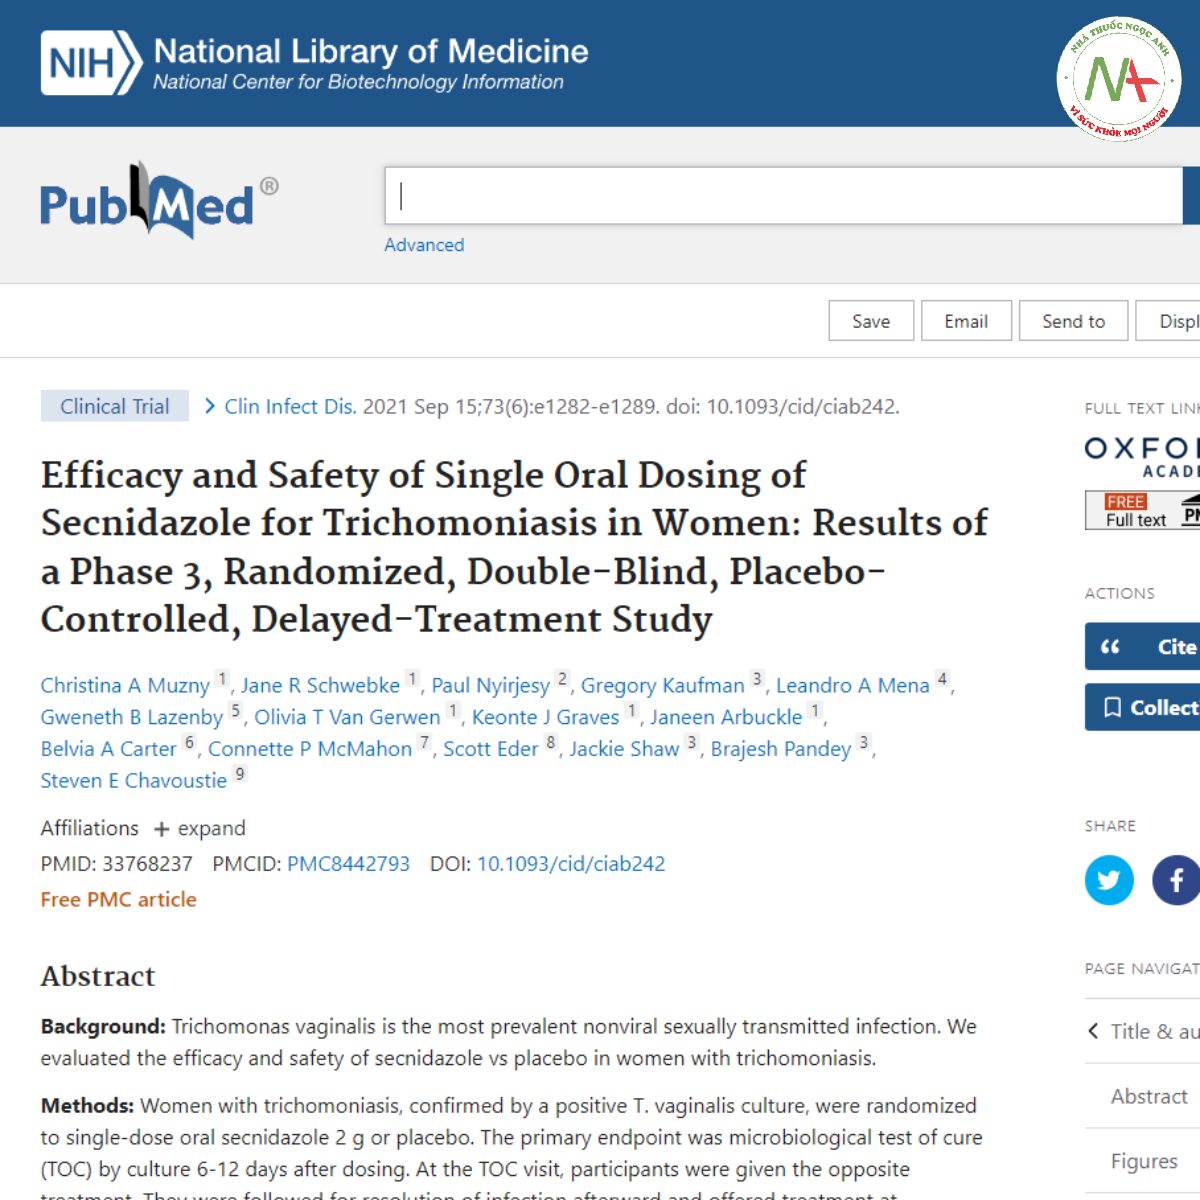 Efficacy and Safety of Single Oral Dosing of Secnidazole for Trichomoniasis in Women_ Results of a Phase 3, Randomized, Double-Blind, Placebo-Controlled, Delayed-Treatment Study